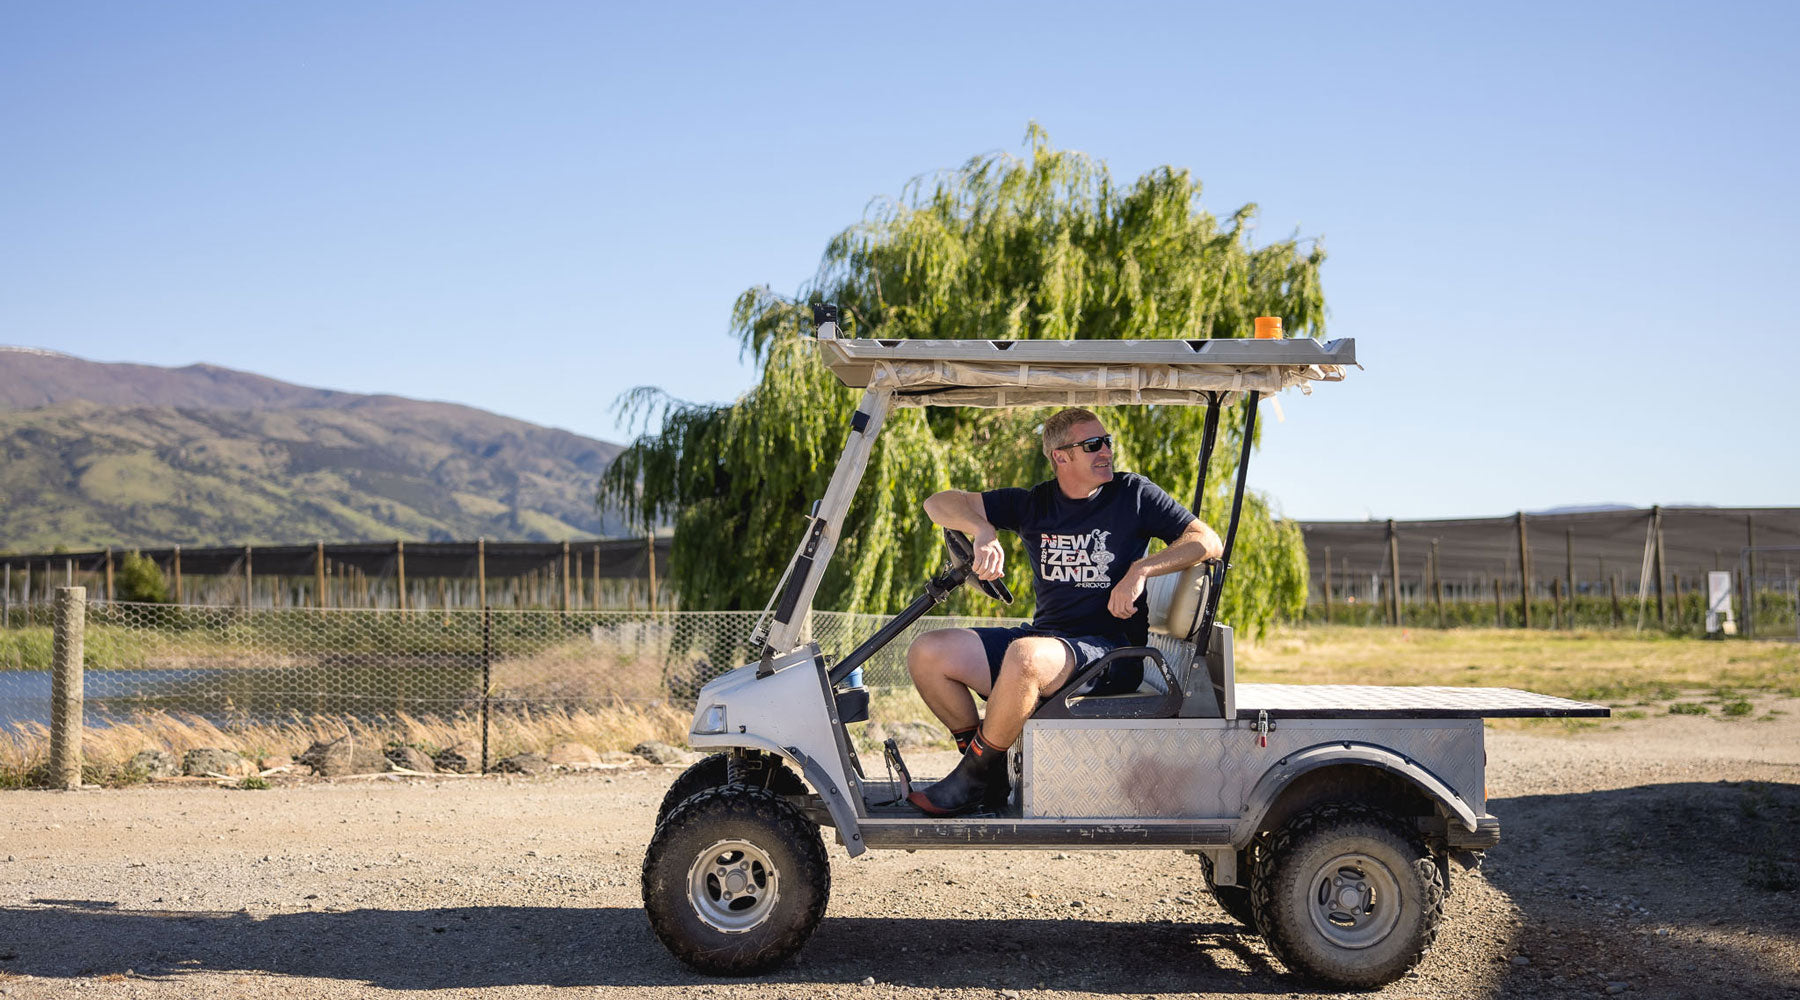 Orchard manager Euan White sitting in one of the Orchards electric golf carts.